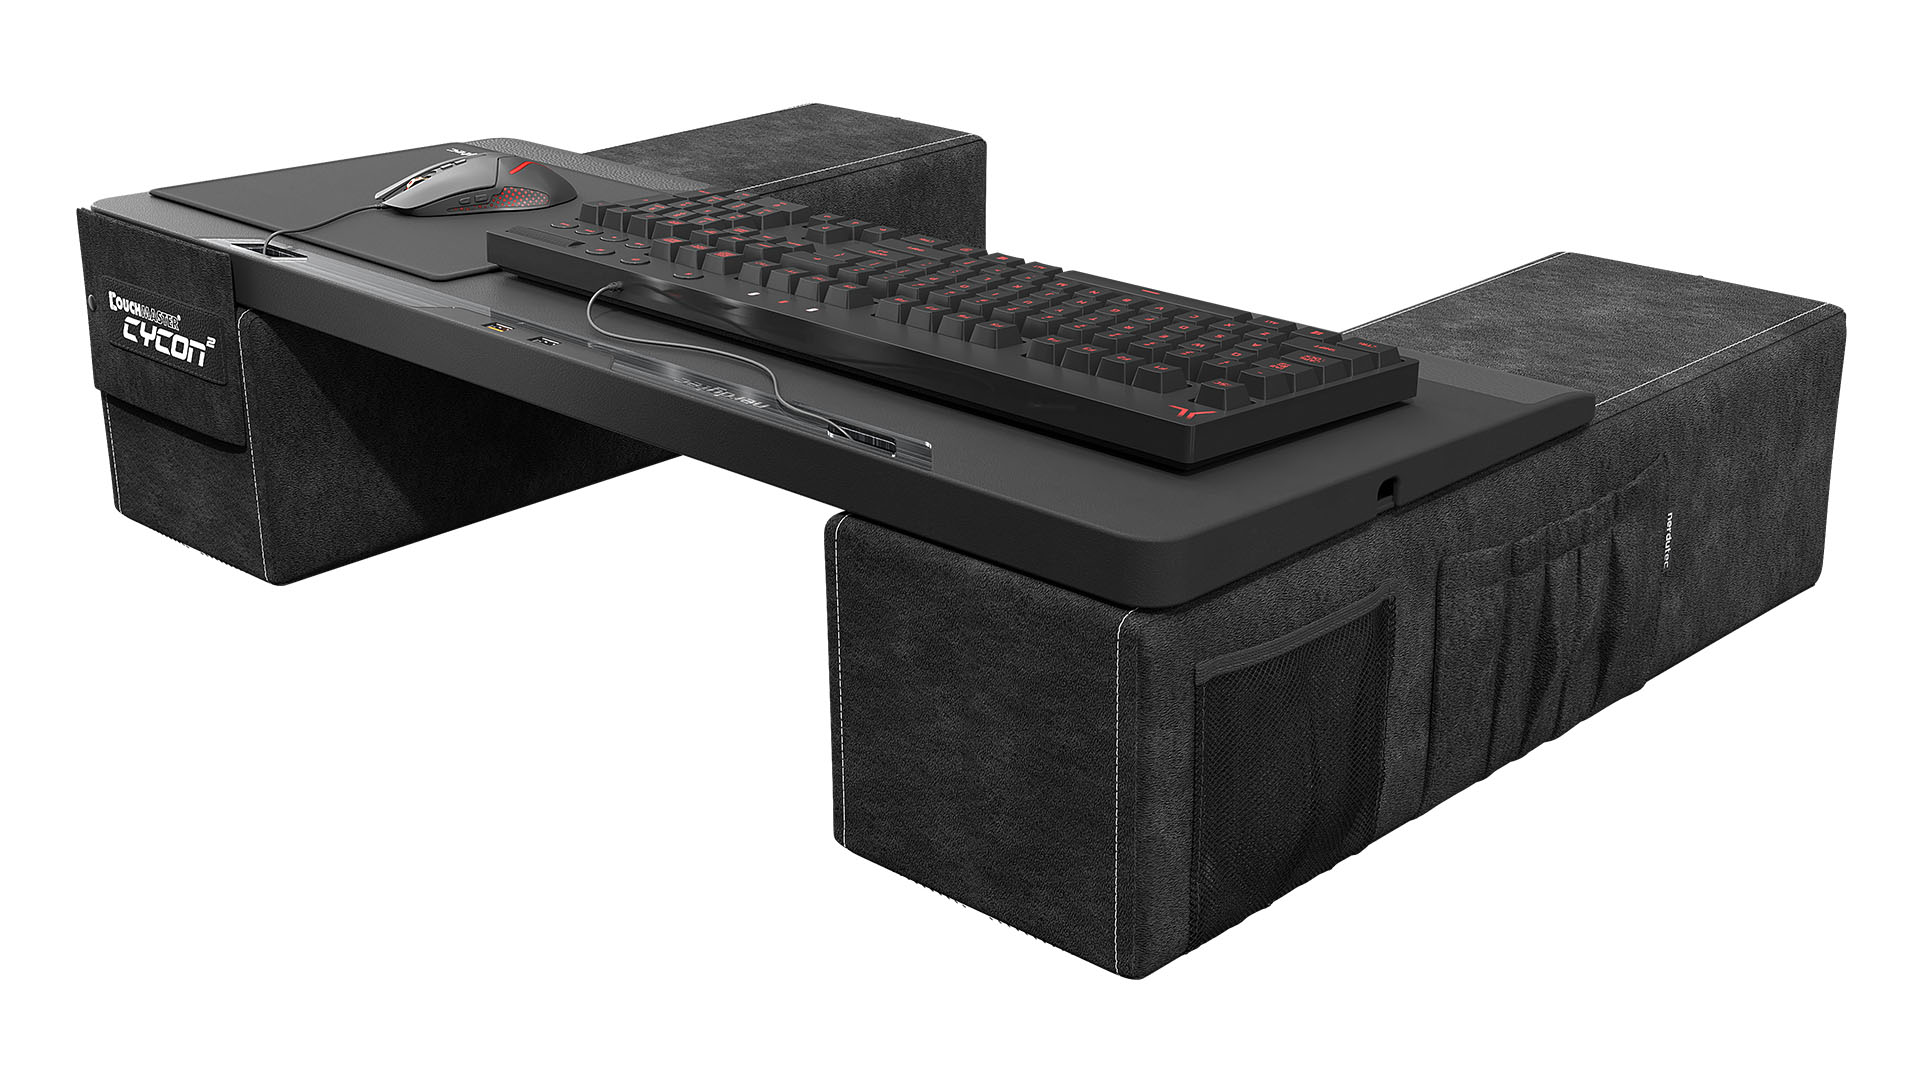 COUCHMASTER Cycon – The ultimate Couch-Gaming solution